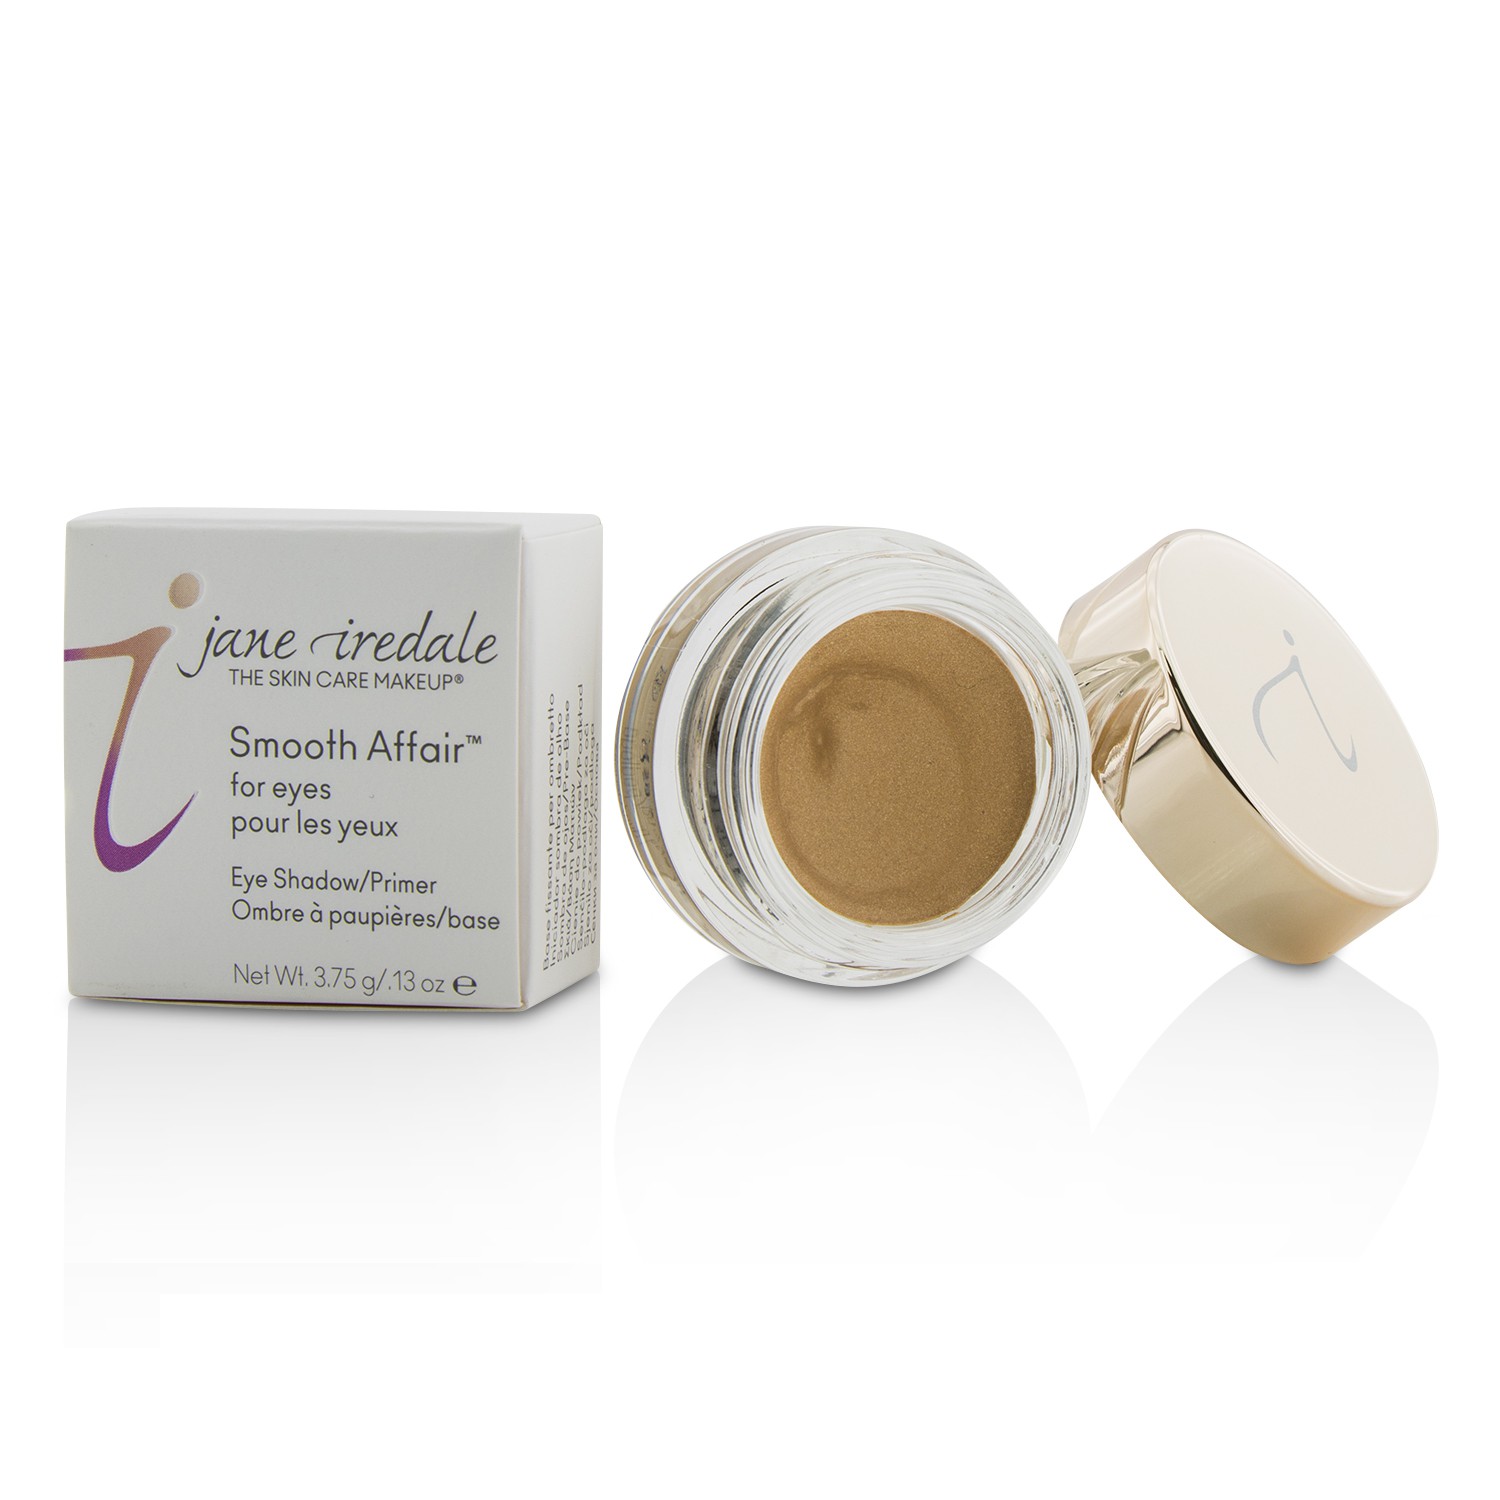 Smooth Affair For Eyes (Eye Shadow/Primer) - Canvas Jane Iredale Image